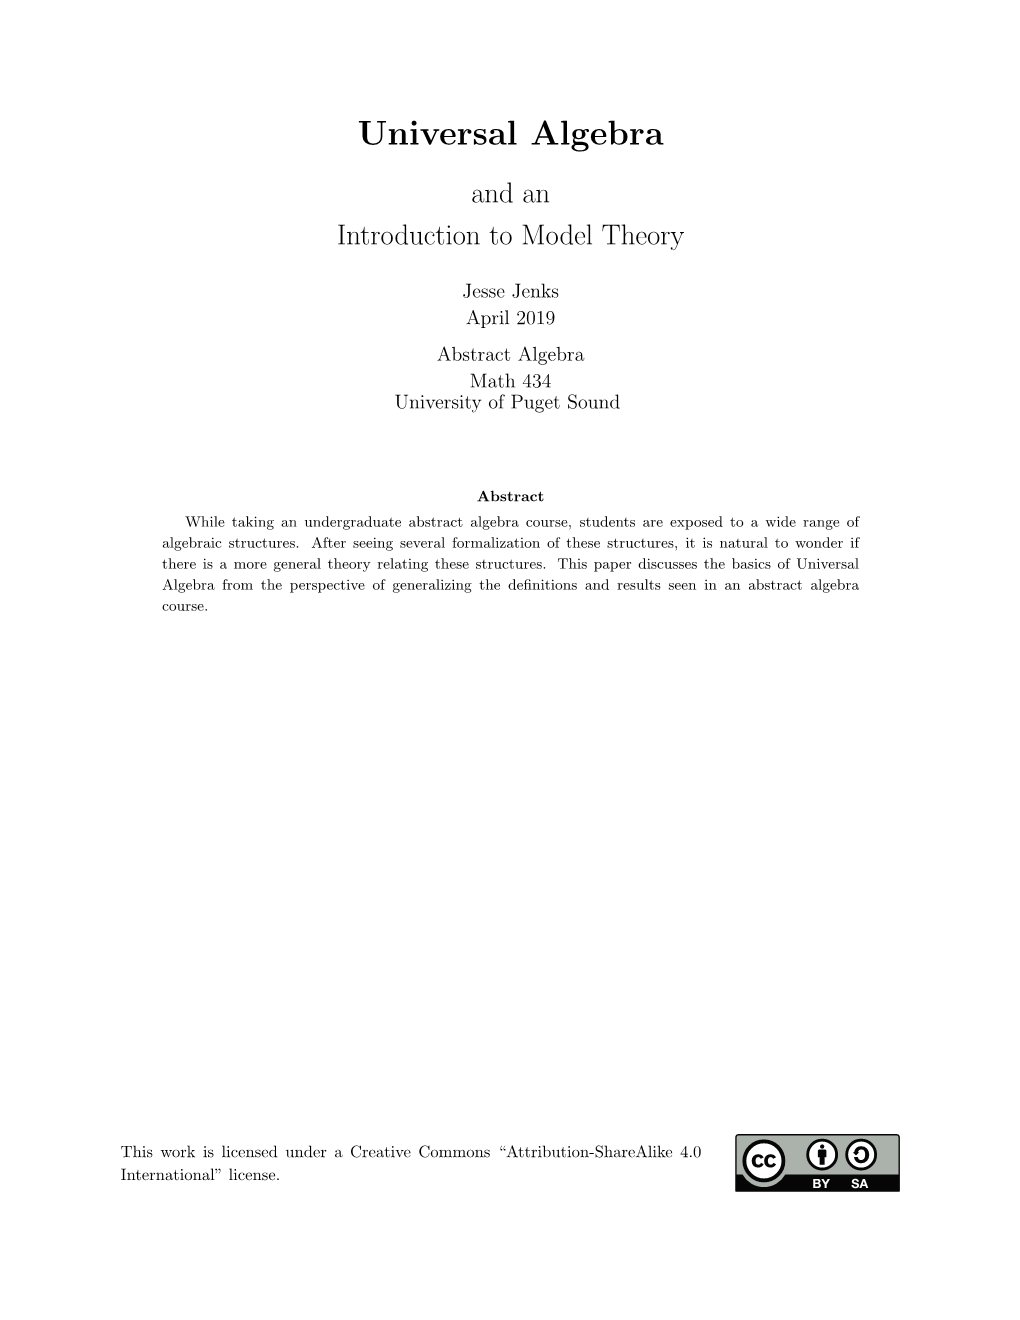 Universal Algebra and an Introduction to Model Theory